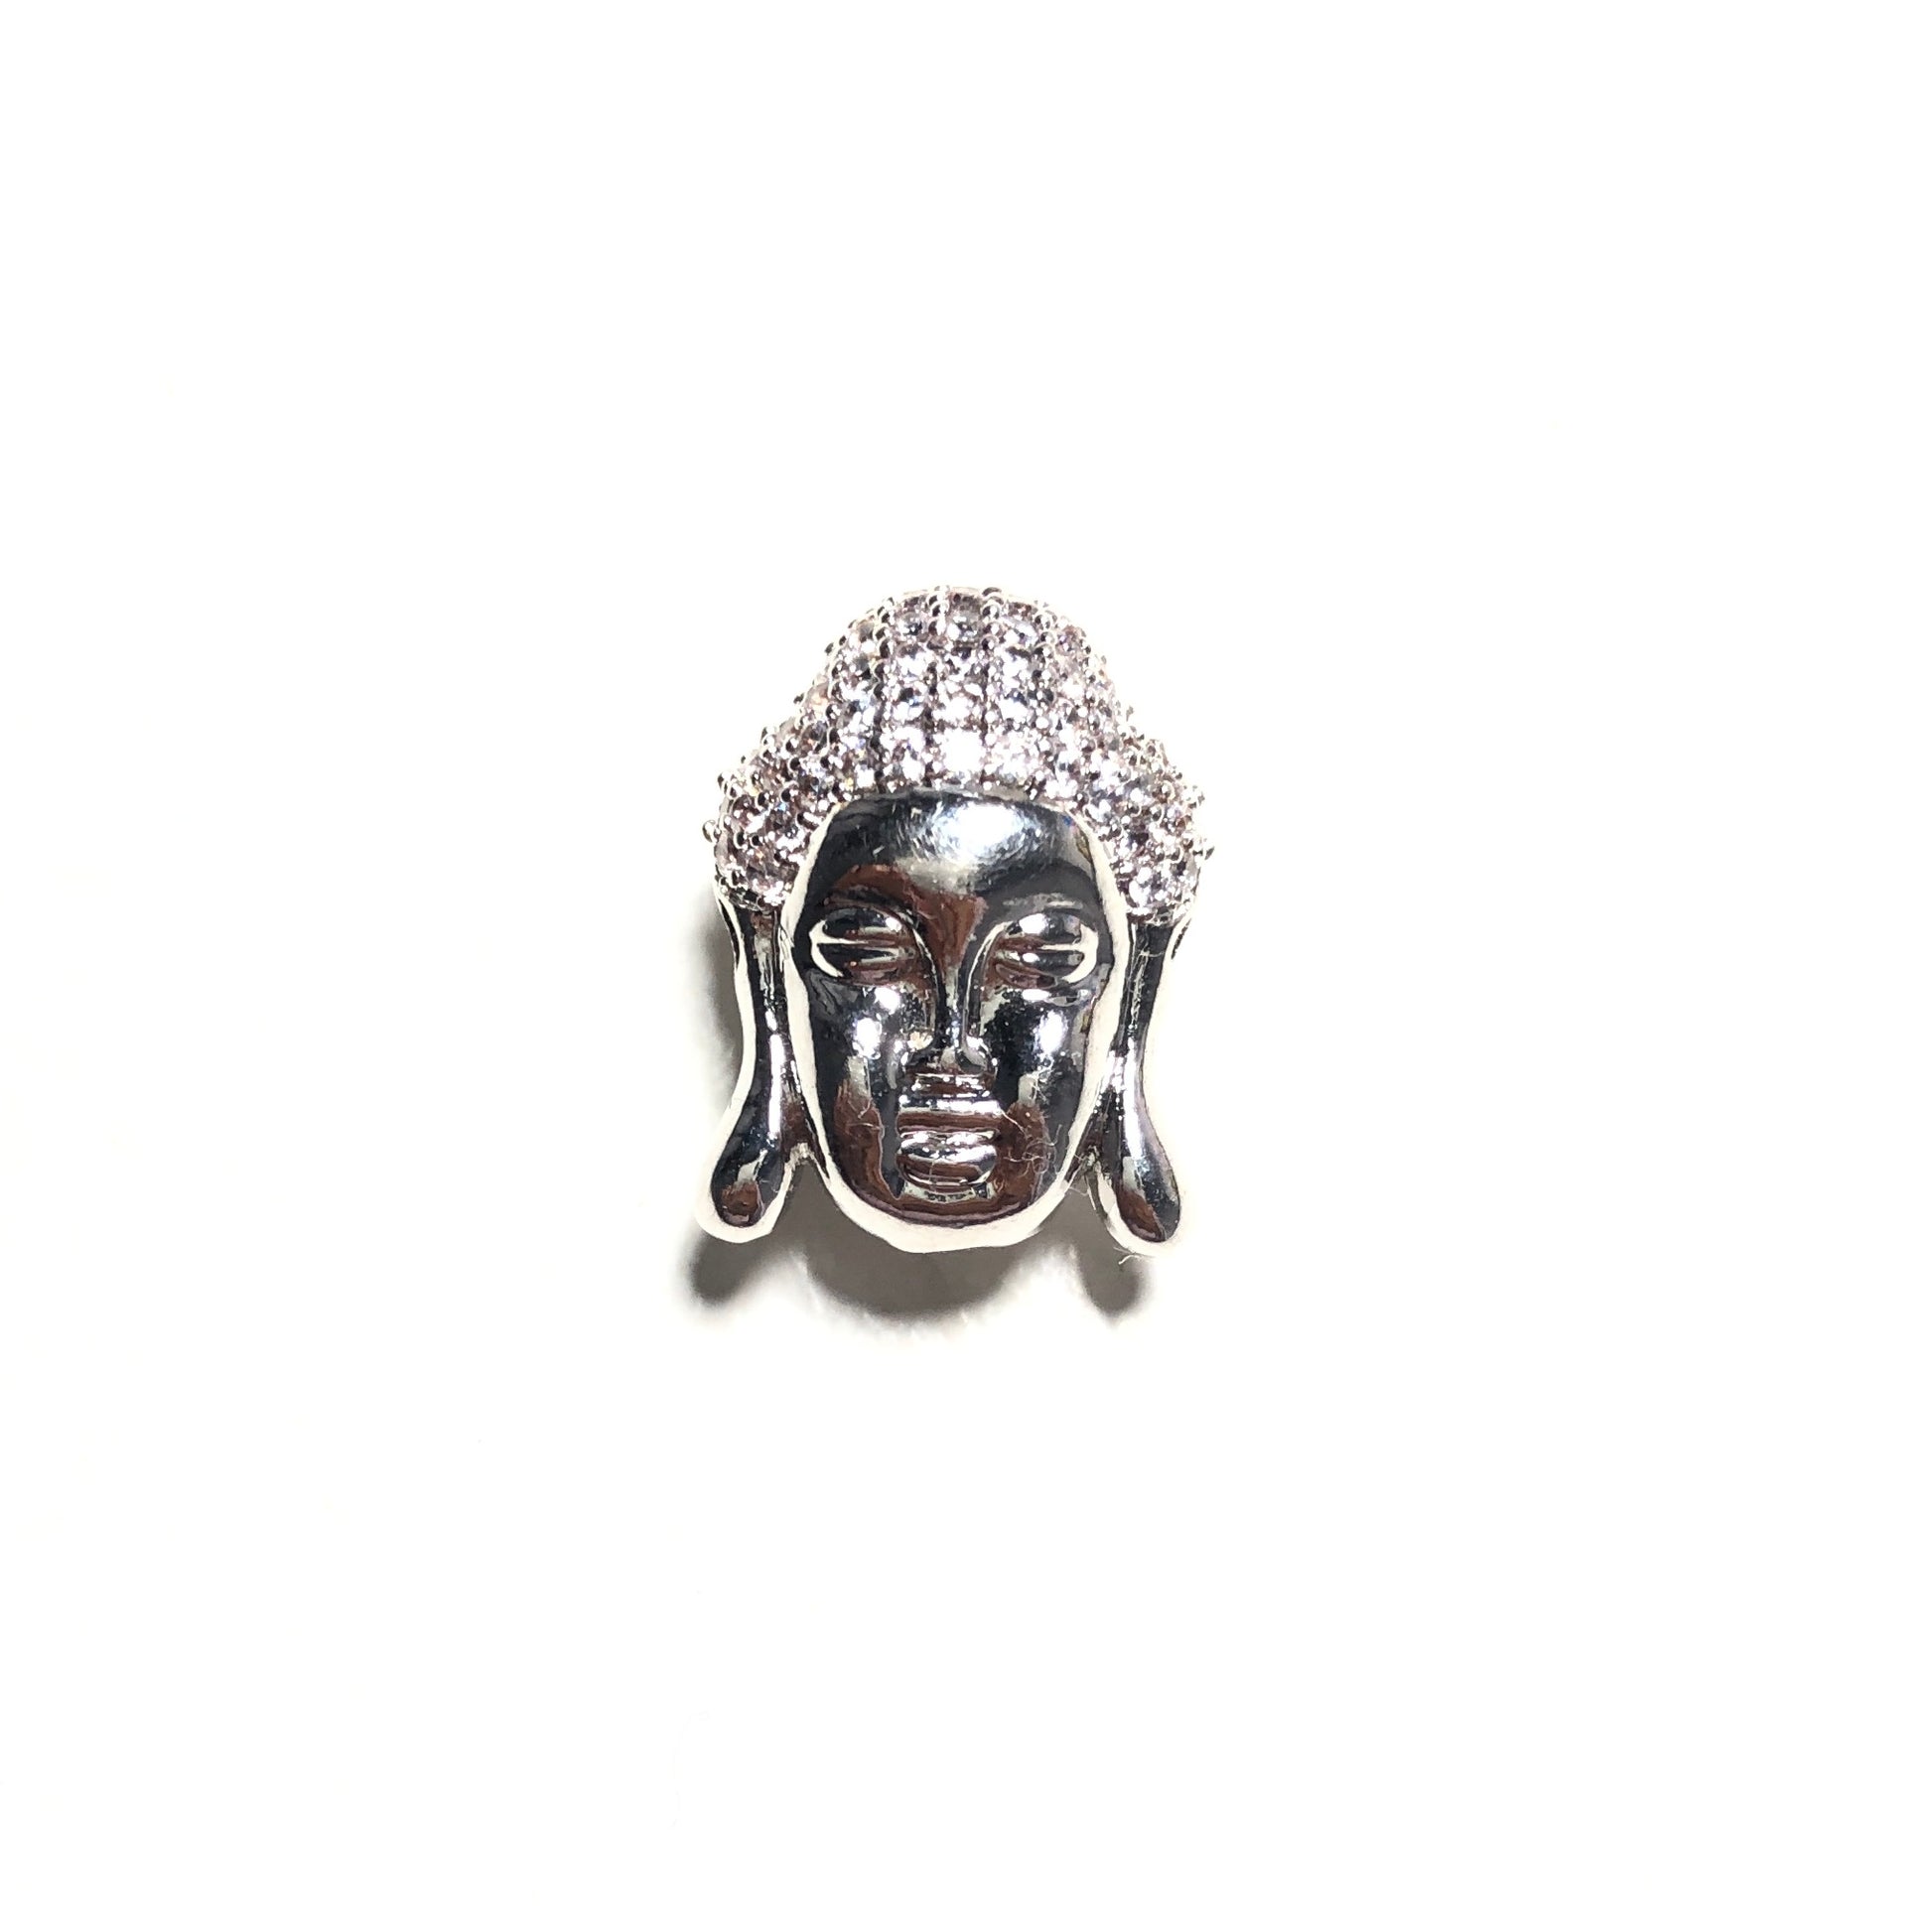 10pcs/lot 18*14mm CZ Paved Buddha Spacers Silver CZ Paved Spacers Charms Beads Beyond